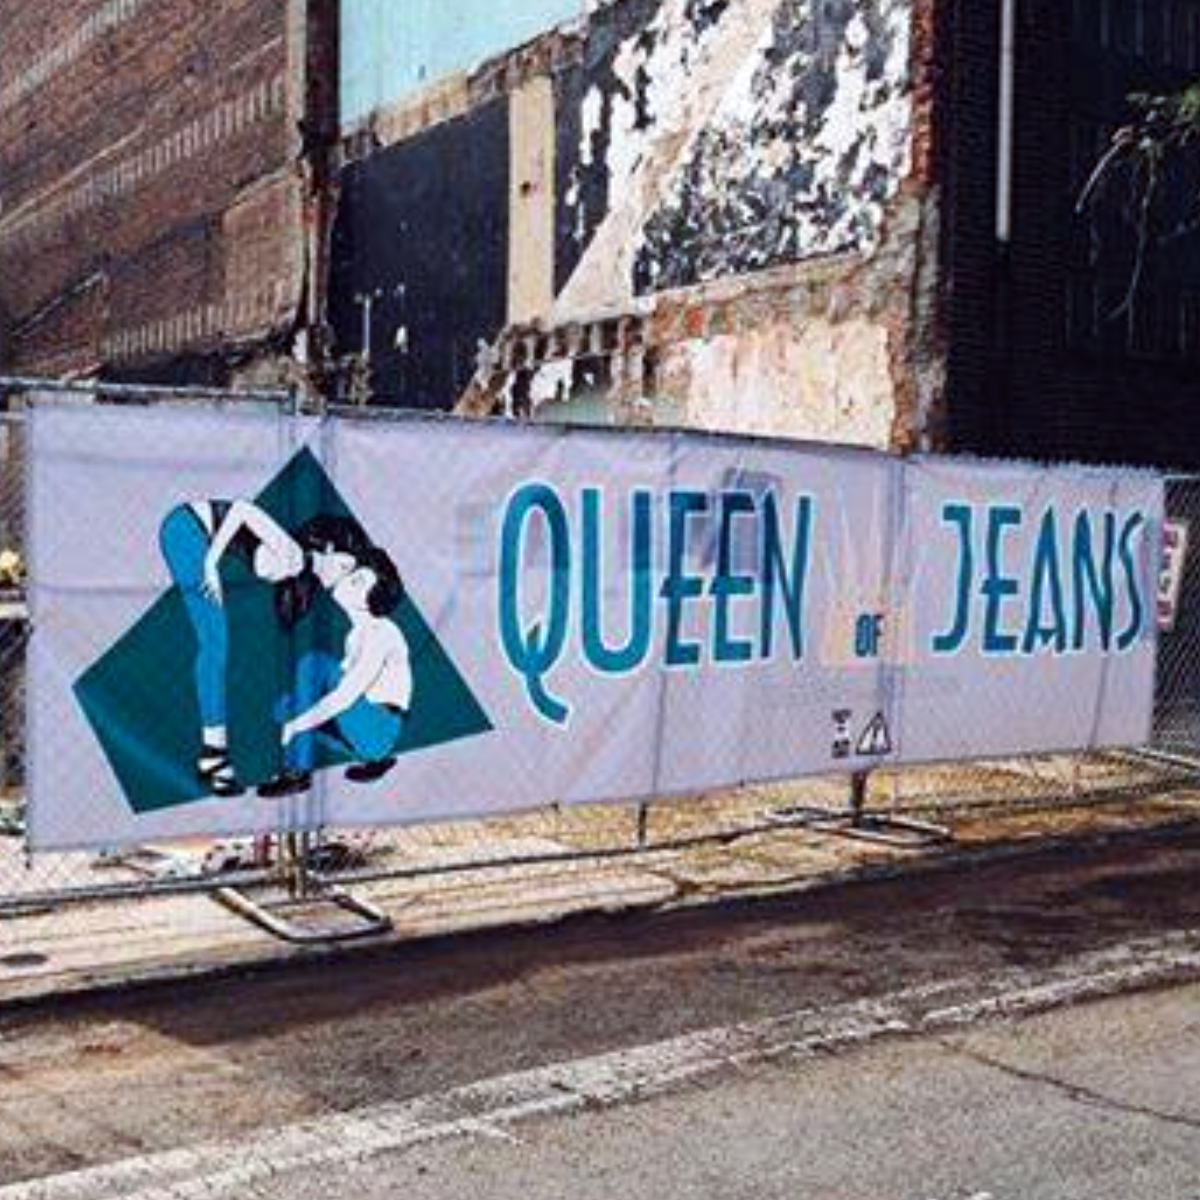 "Queen of Jeans" collaboration with KidHazo at the site of the former King of Jeans store on 13th and Passyunk Avenue (2015)